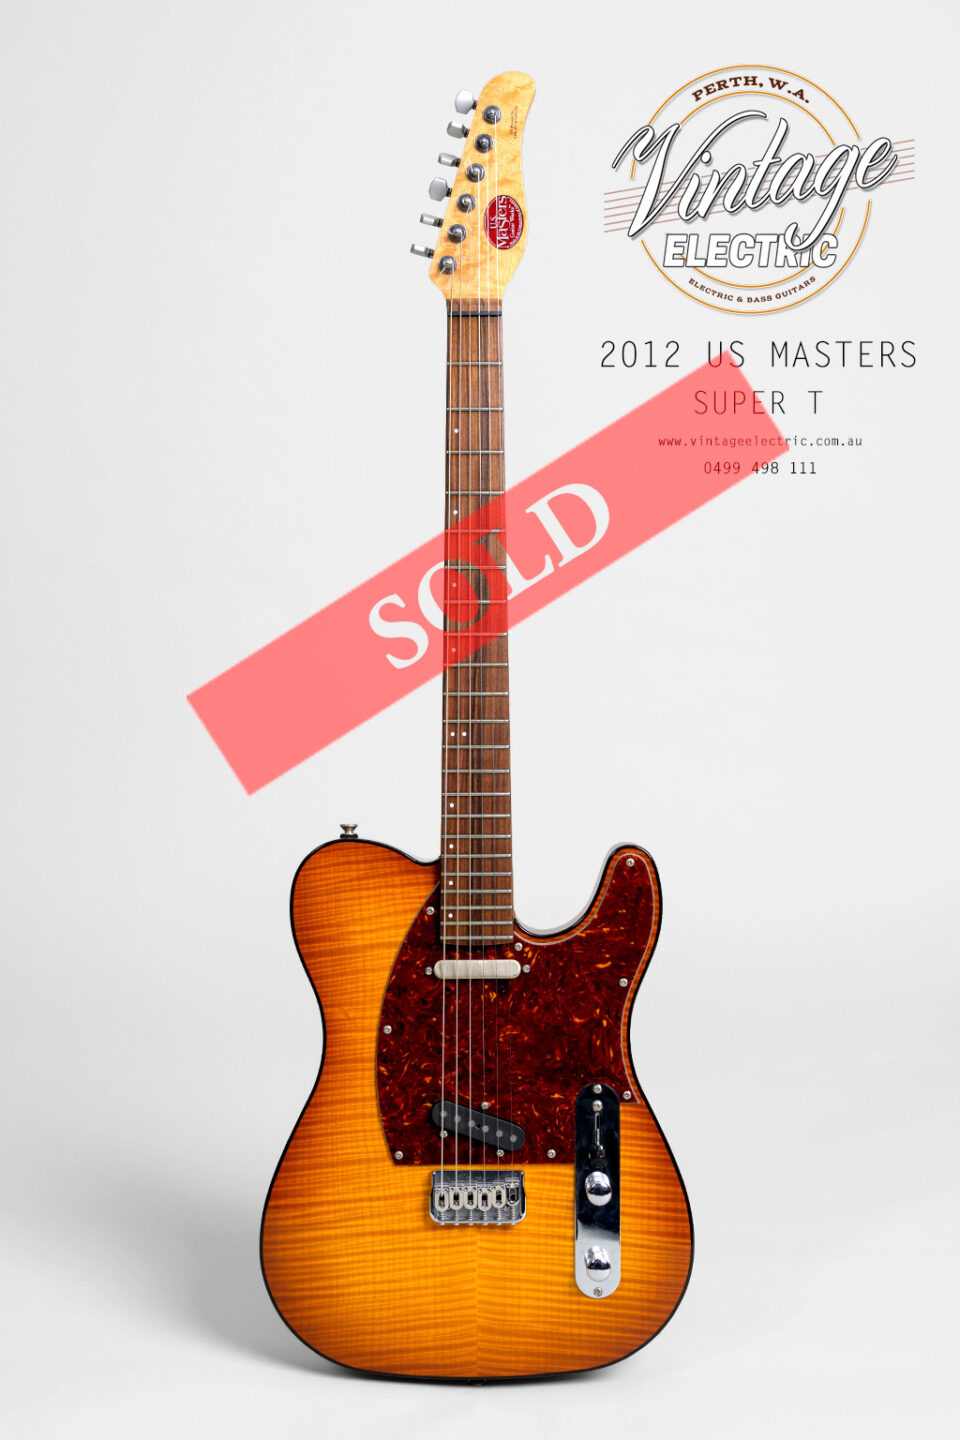 2012 US Masters Super T LARGE SOLD